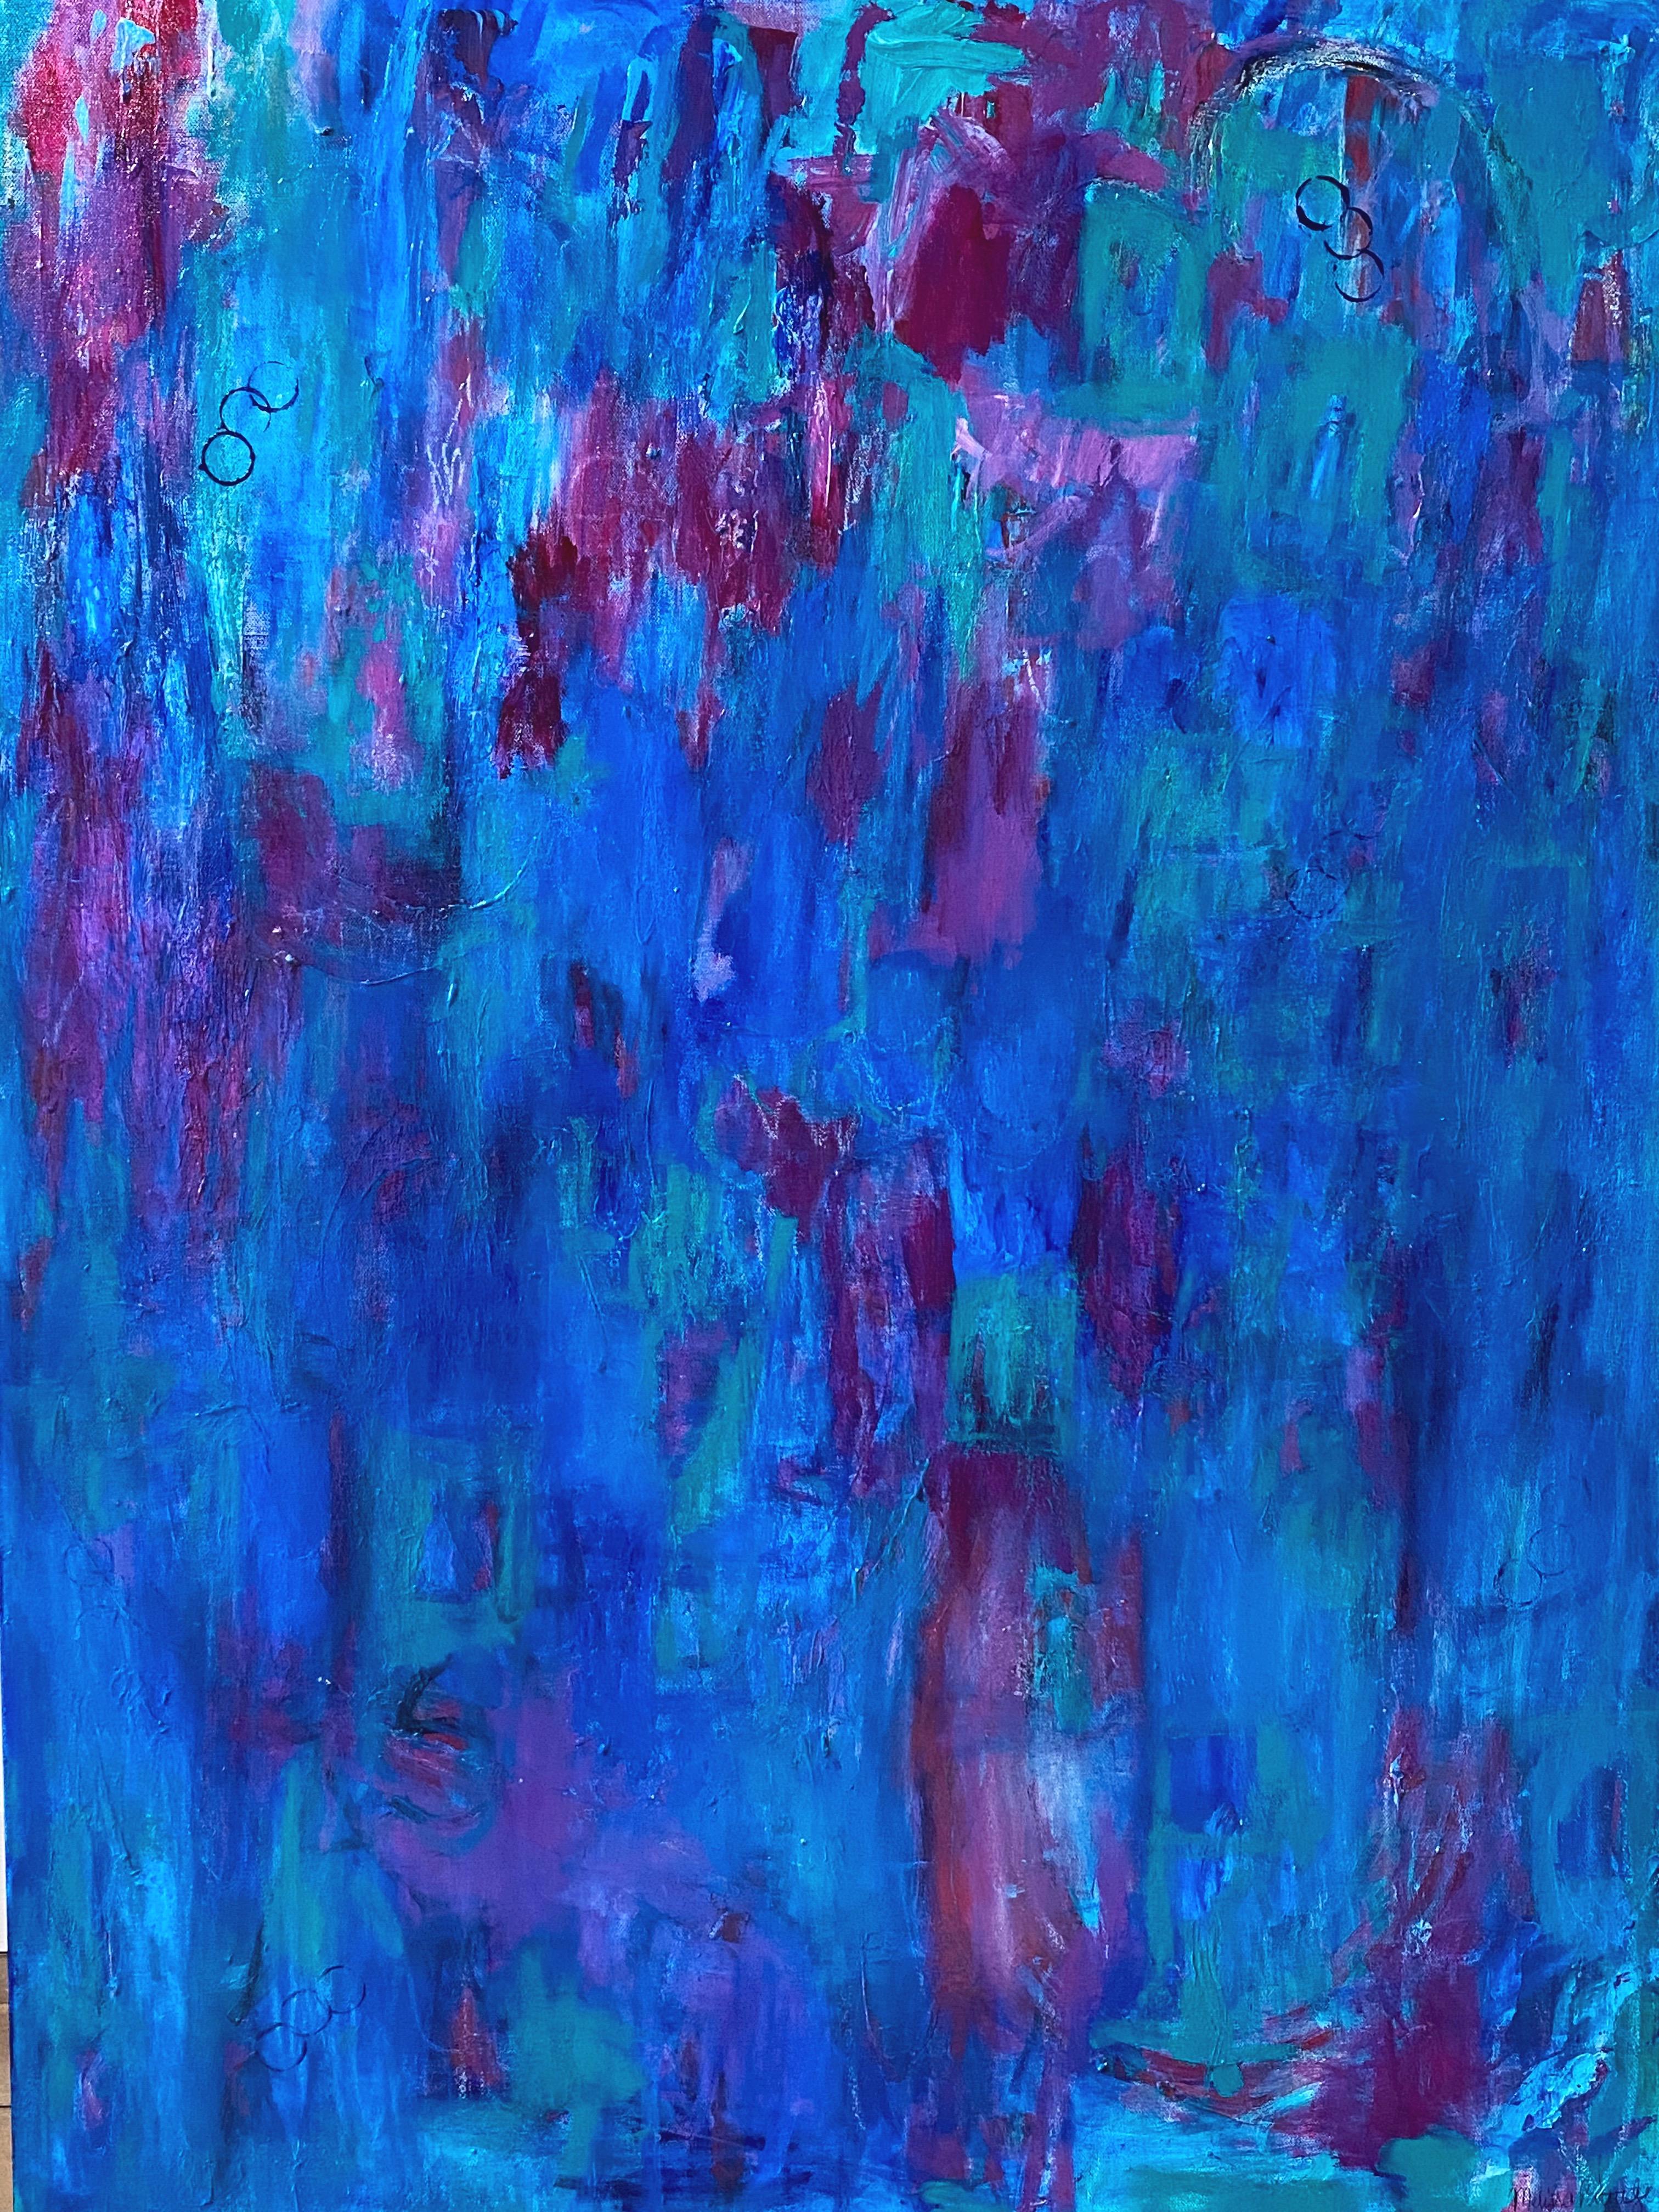 Melissa Partridge Abstract Painting - Blueberry Dreams, Original Acrylic Painting, 2020